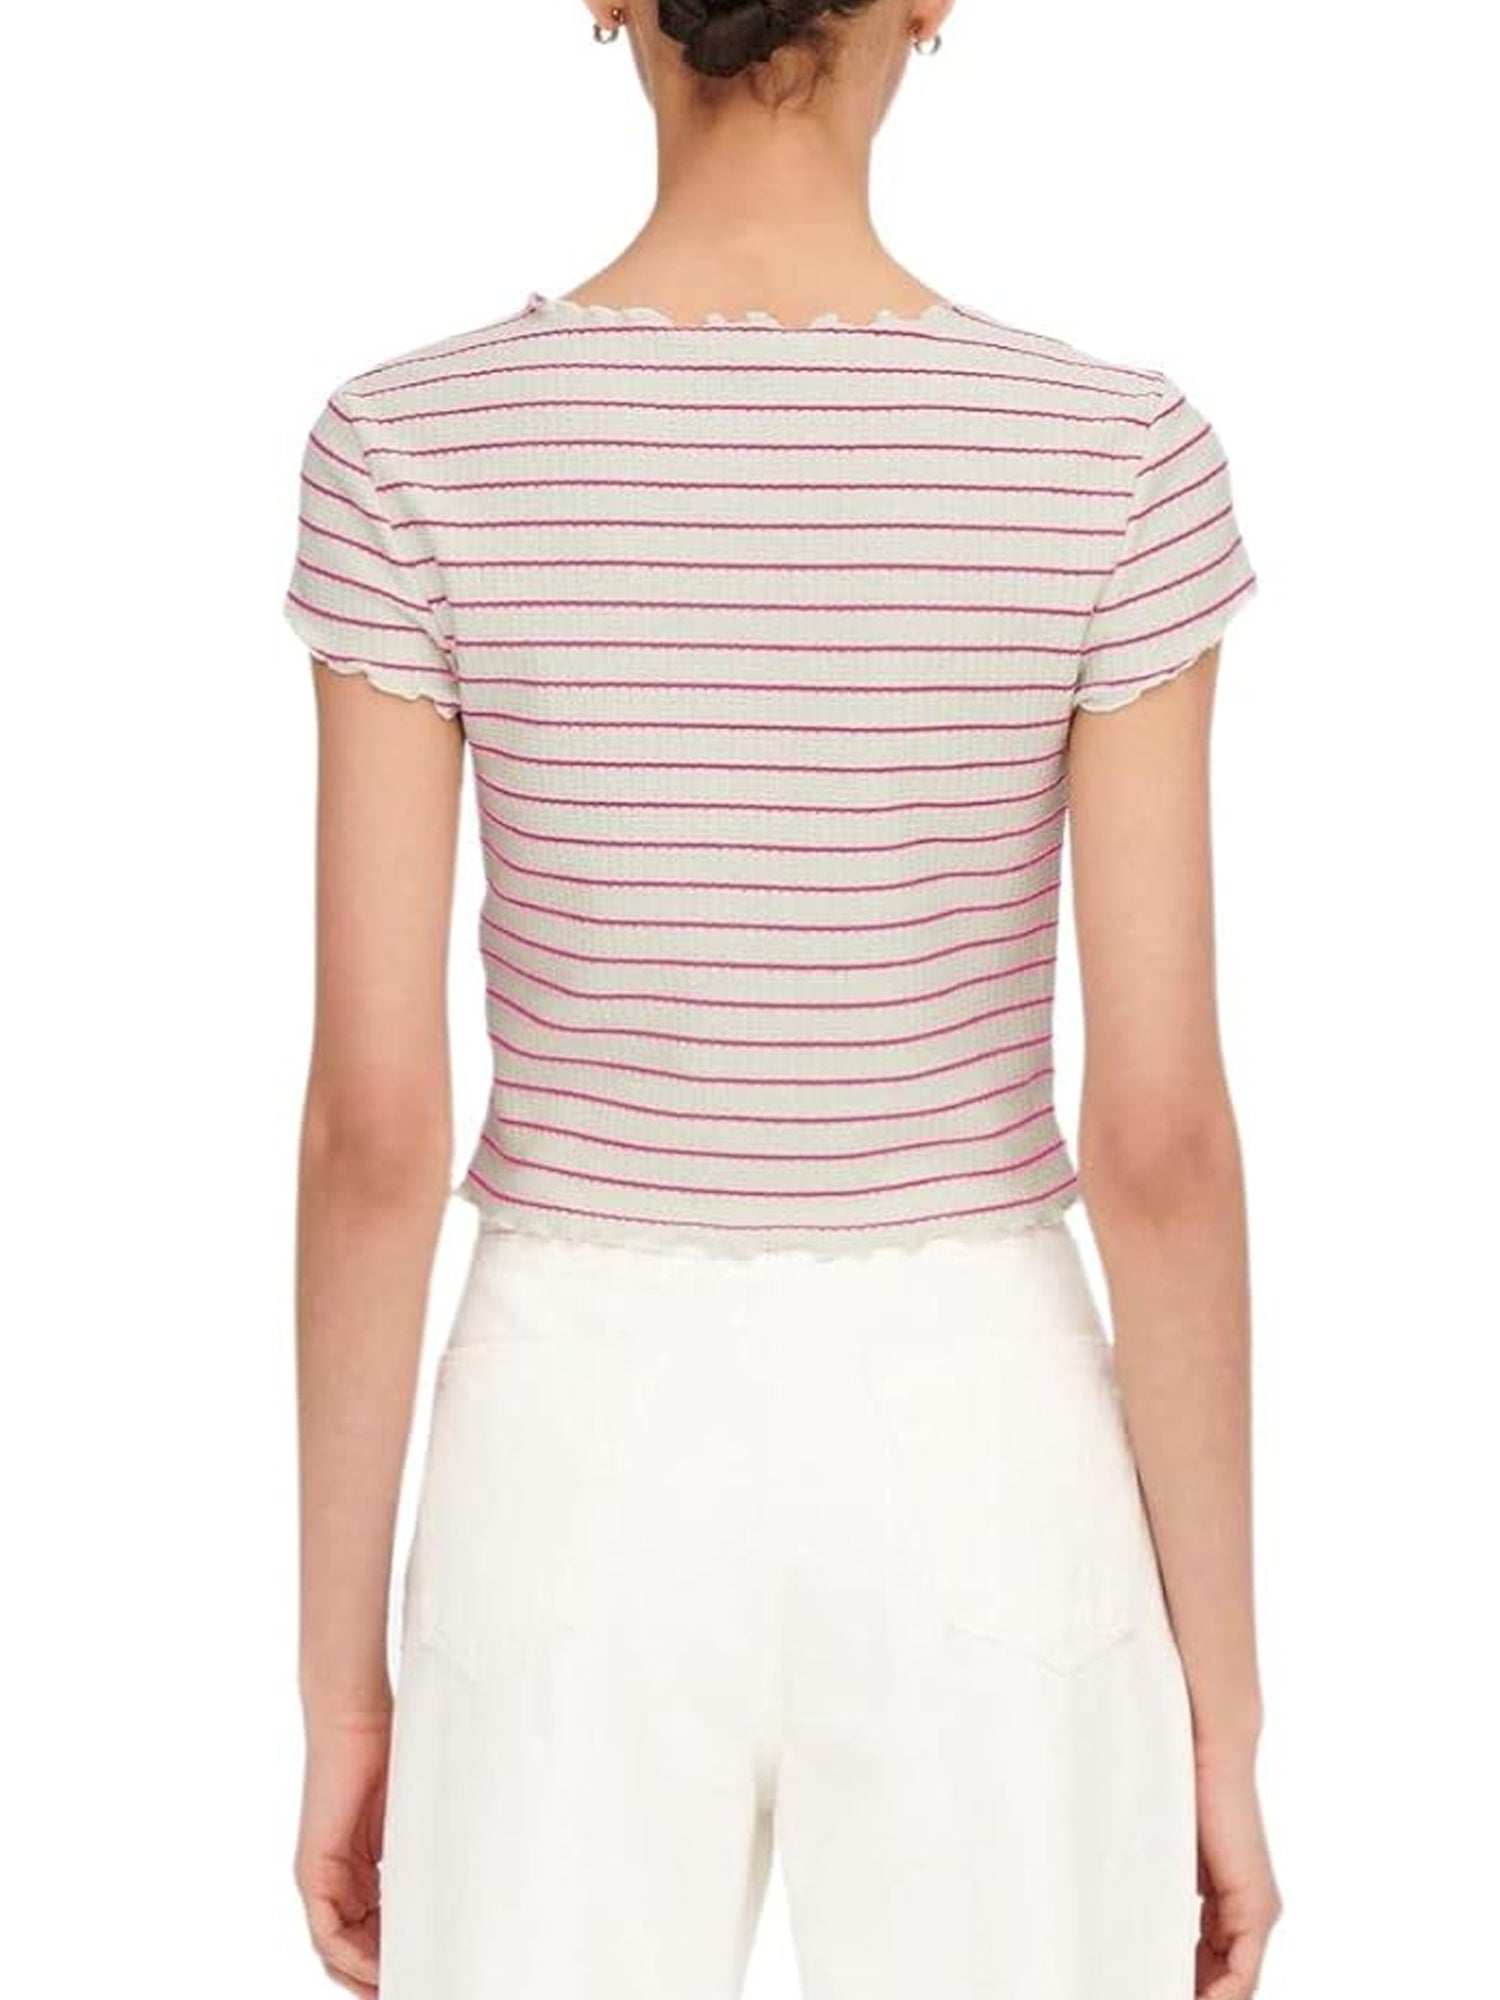 ONLY T-SHIRT CROPPED ANITS A RIGHE BIANCO - ROSA